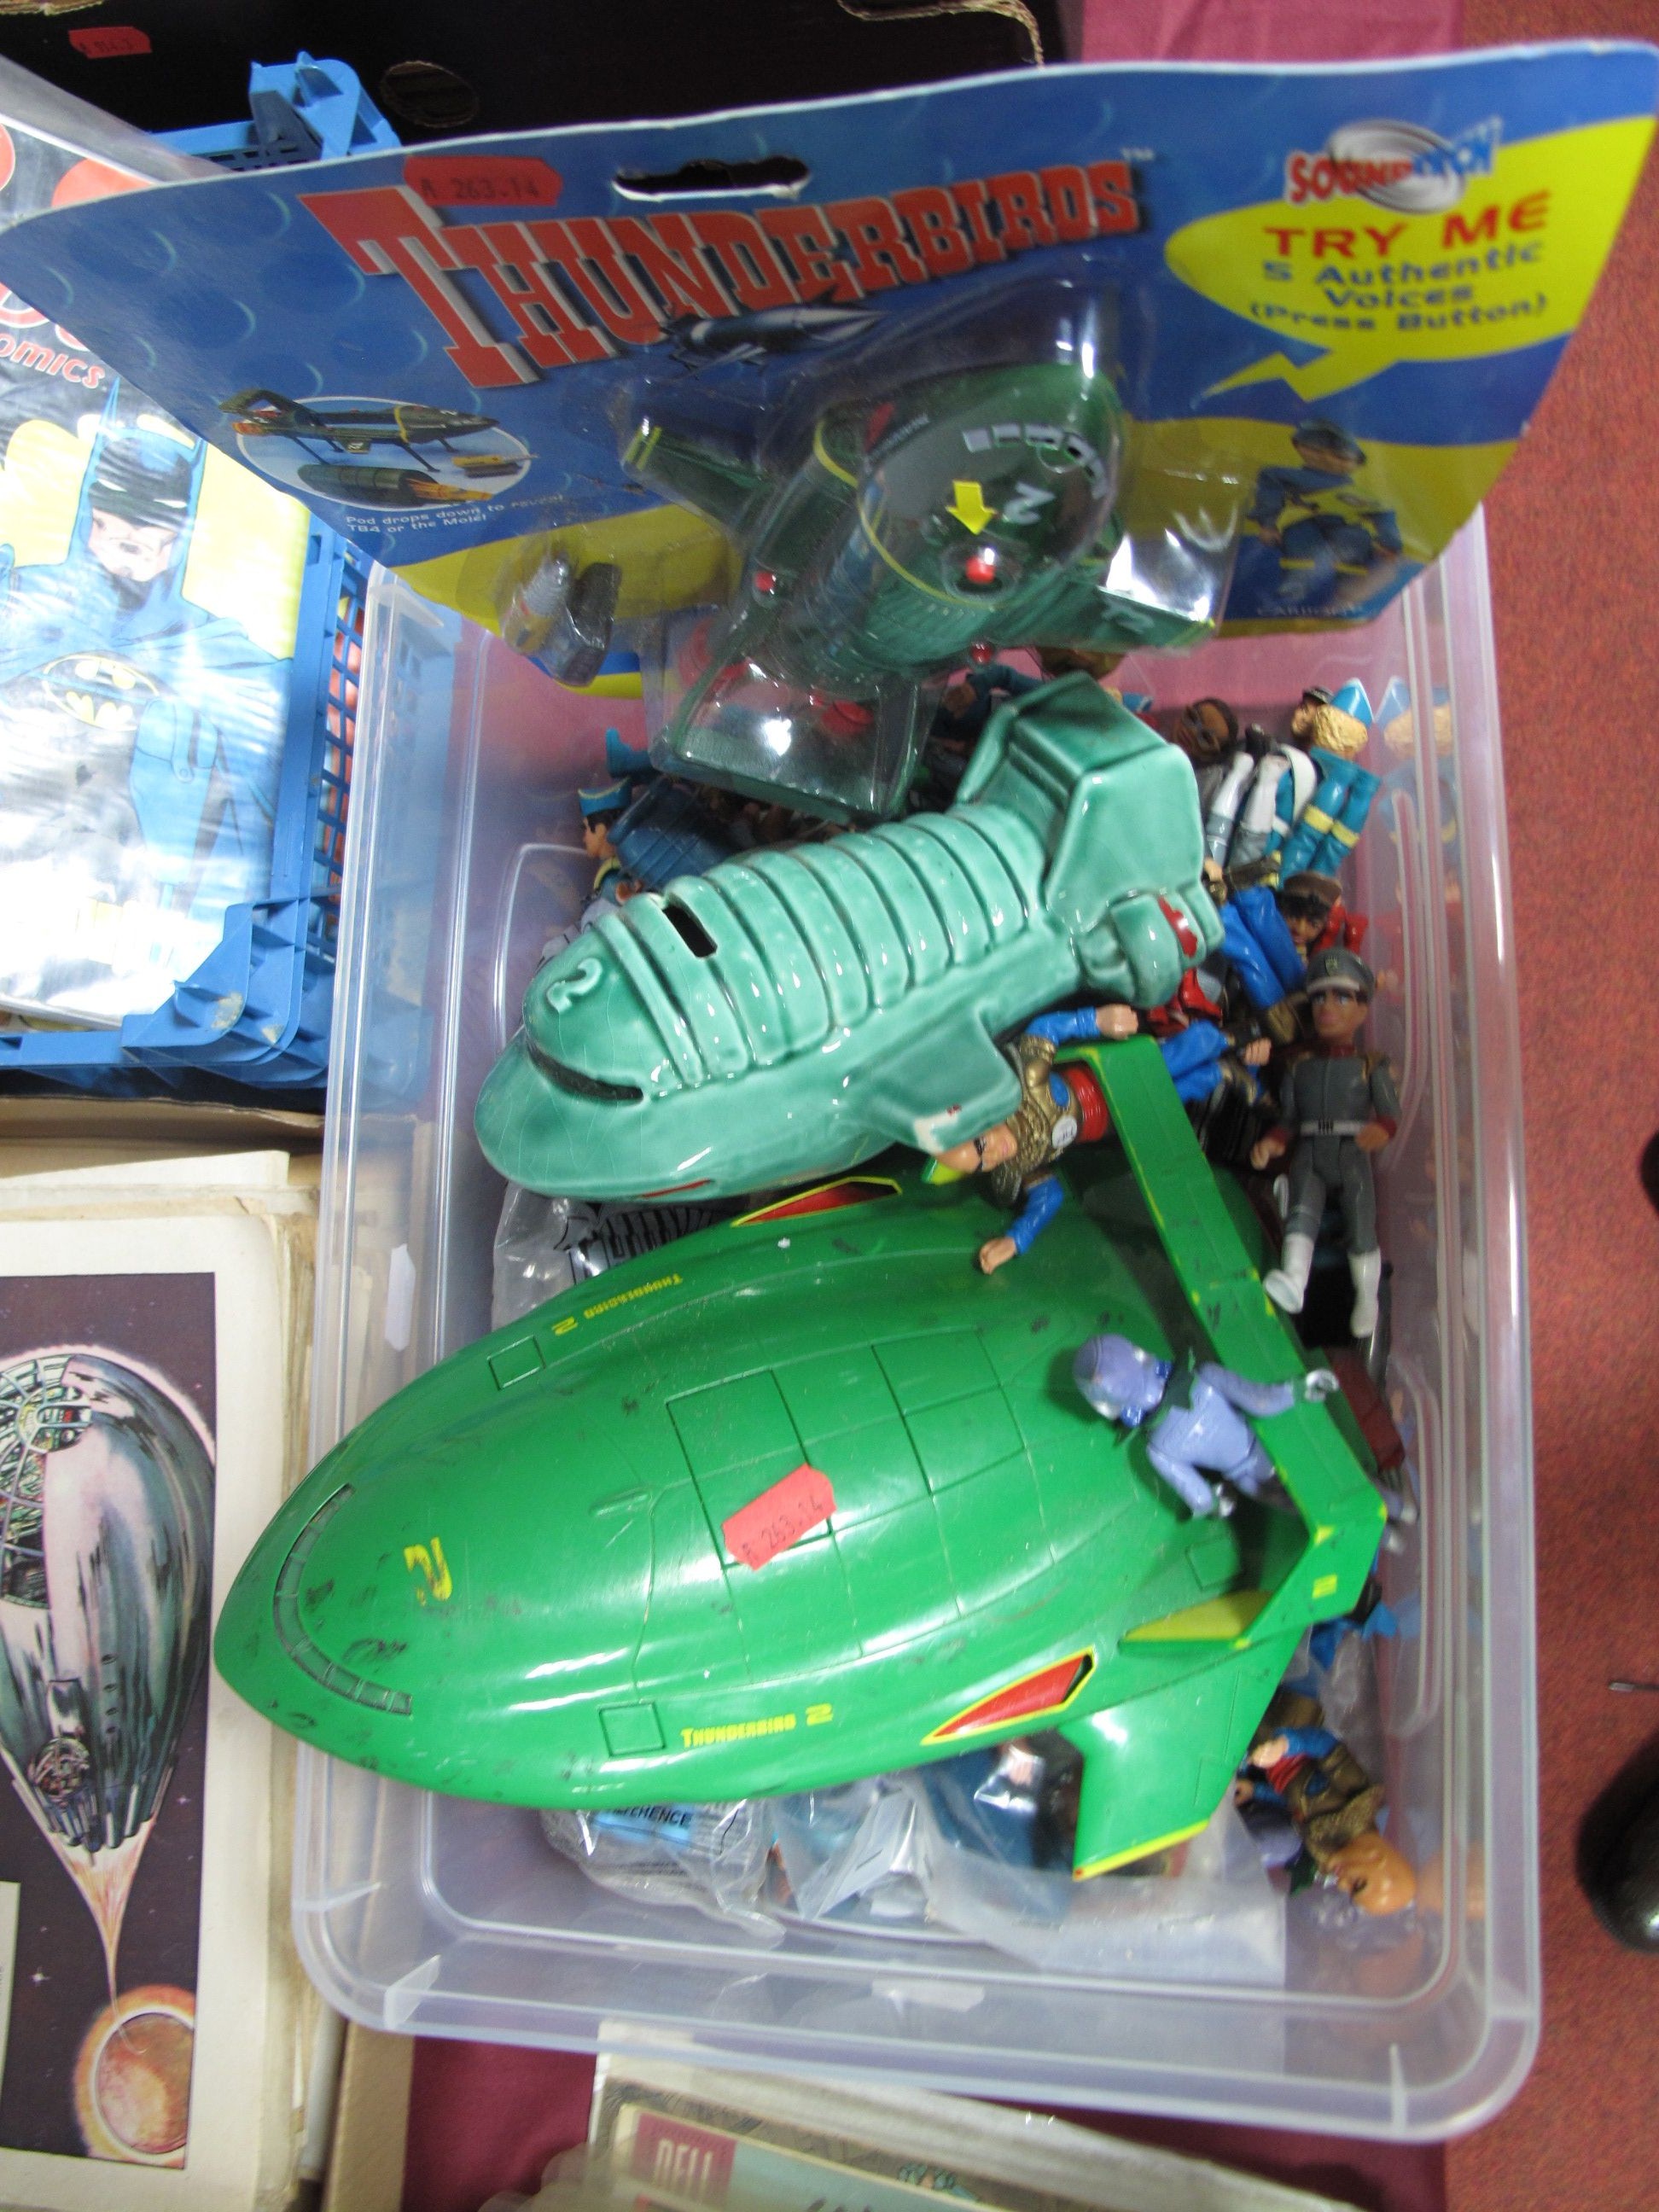 A Quantity of Loose and Bagged Figurines, from Thunderbirds and Stingray by Matchbox, Carlton and